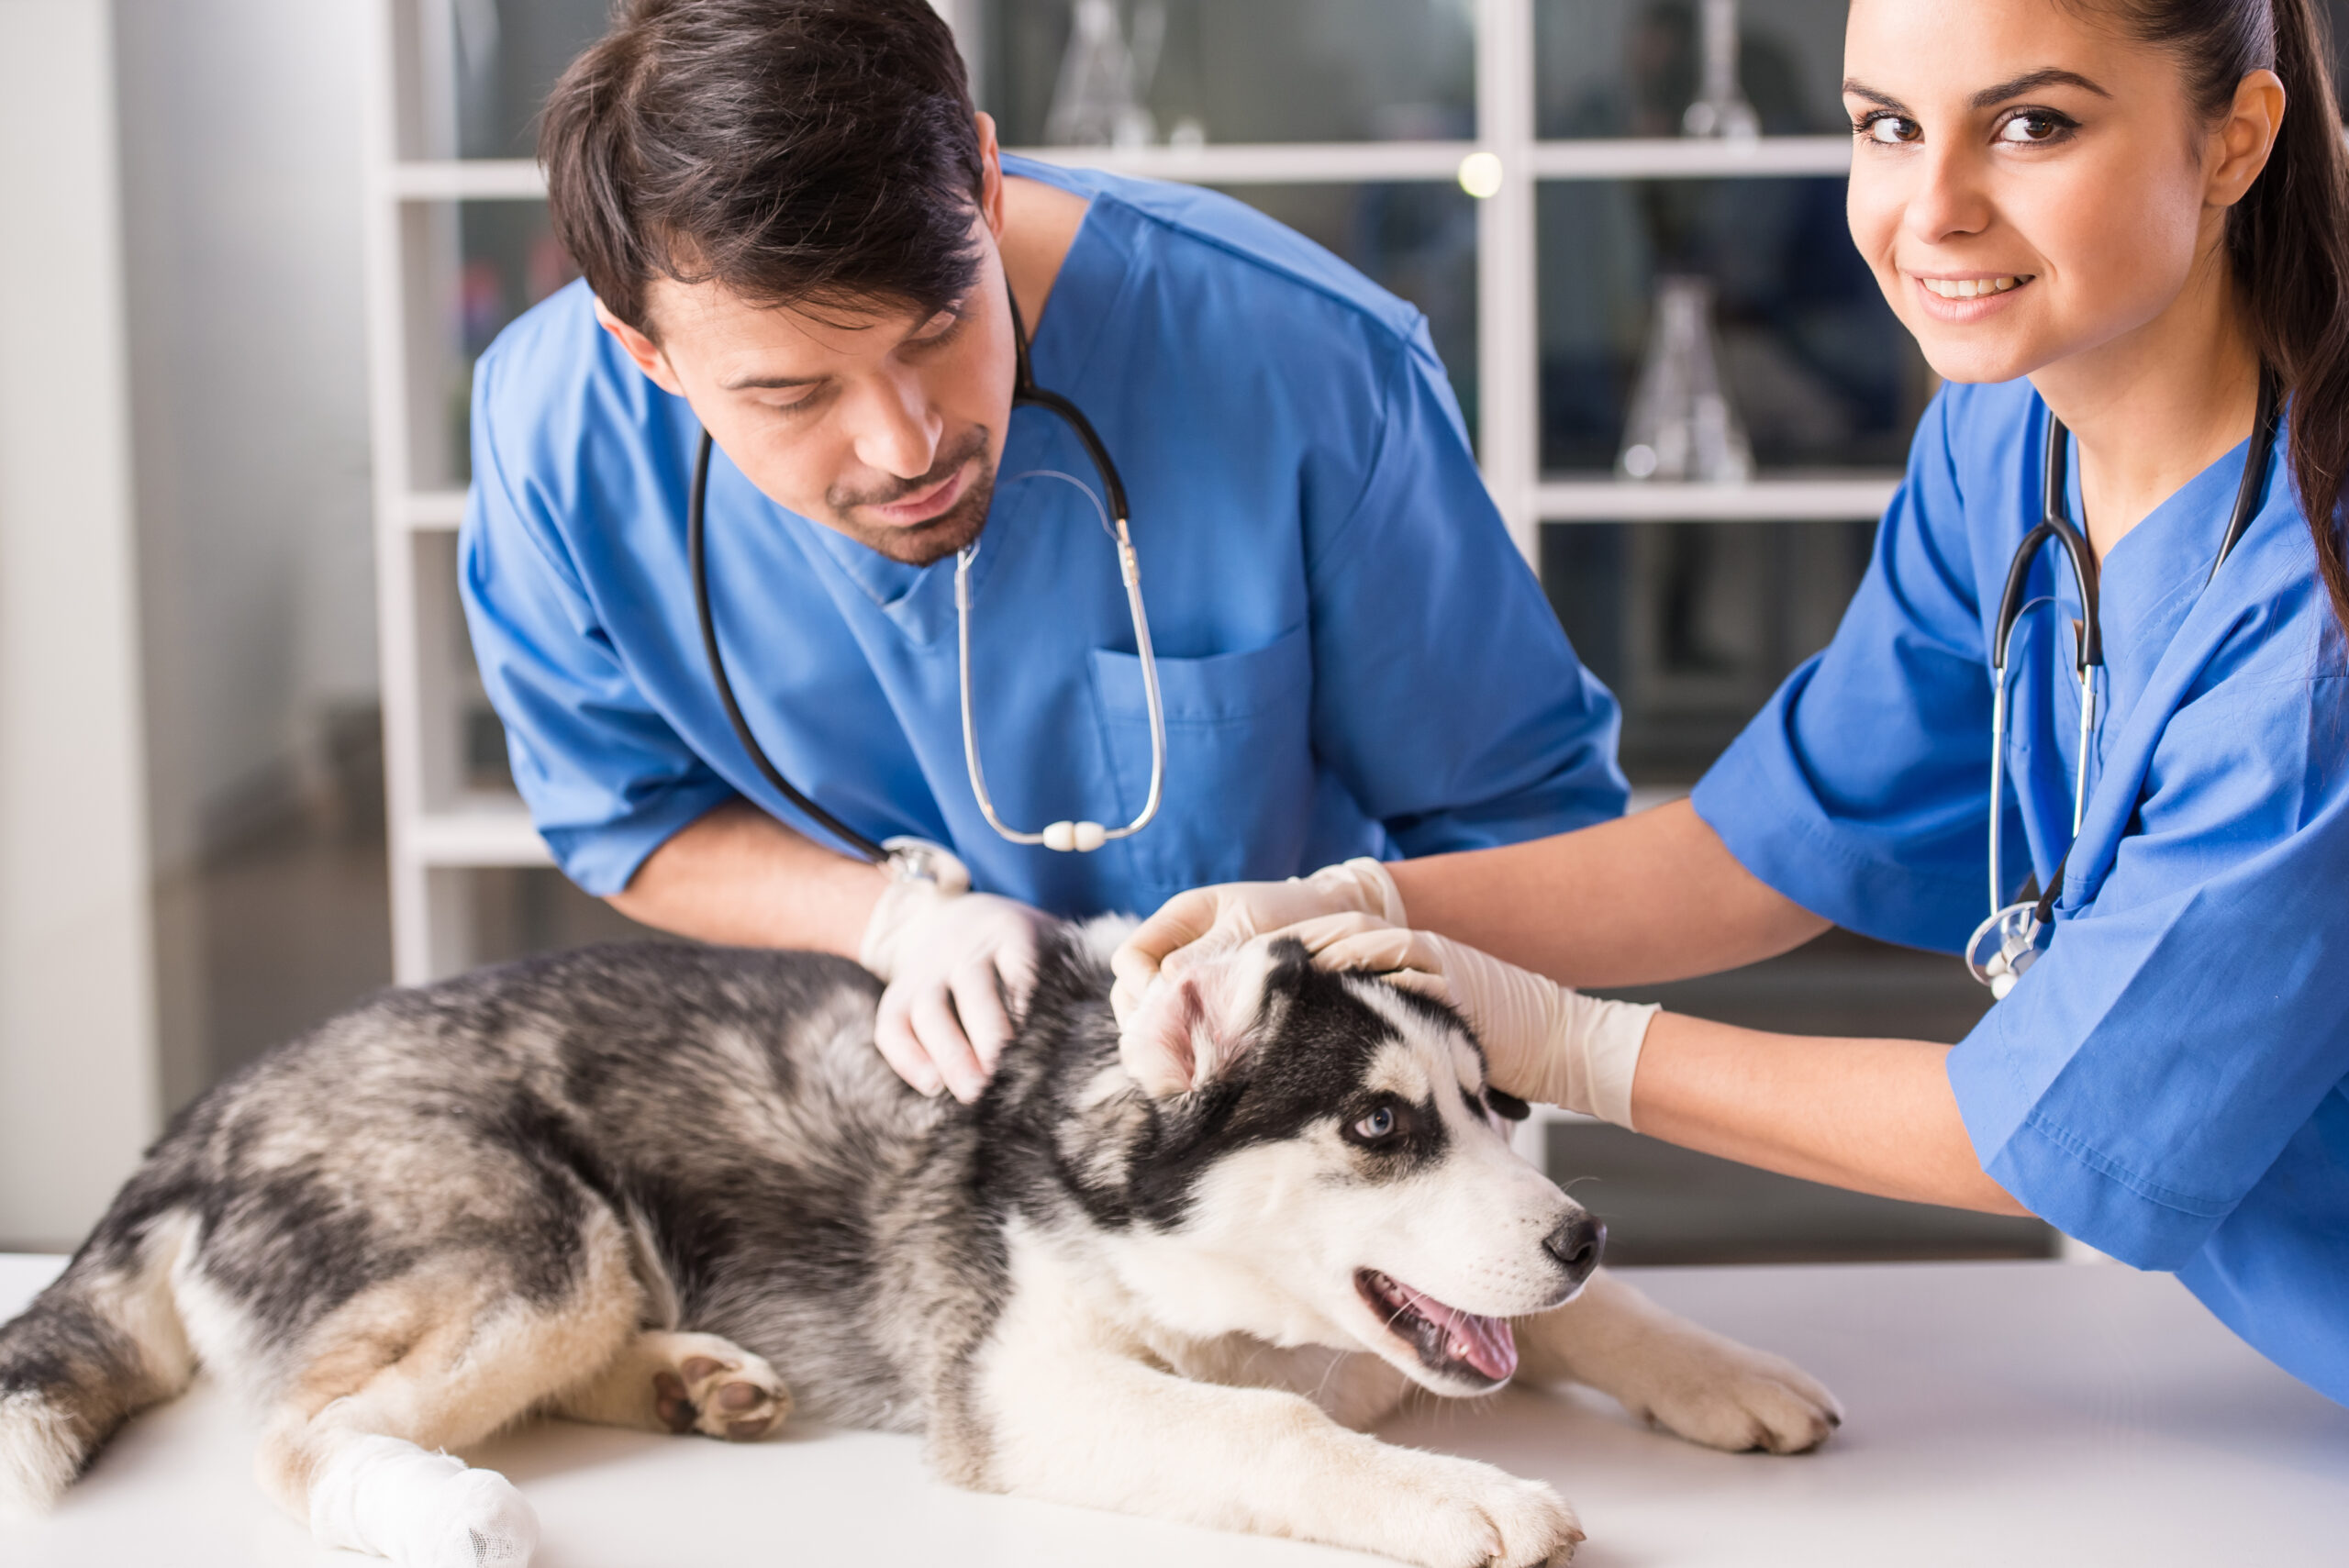 Learn About ICH’s Veterinary Assistant (VA) Program